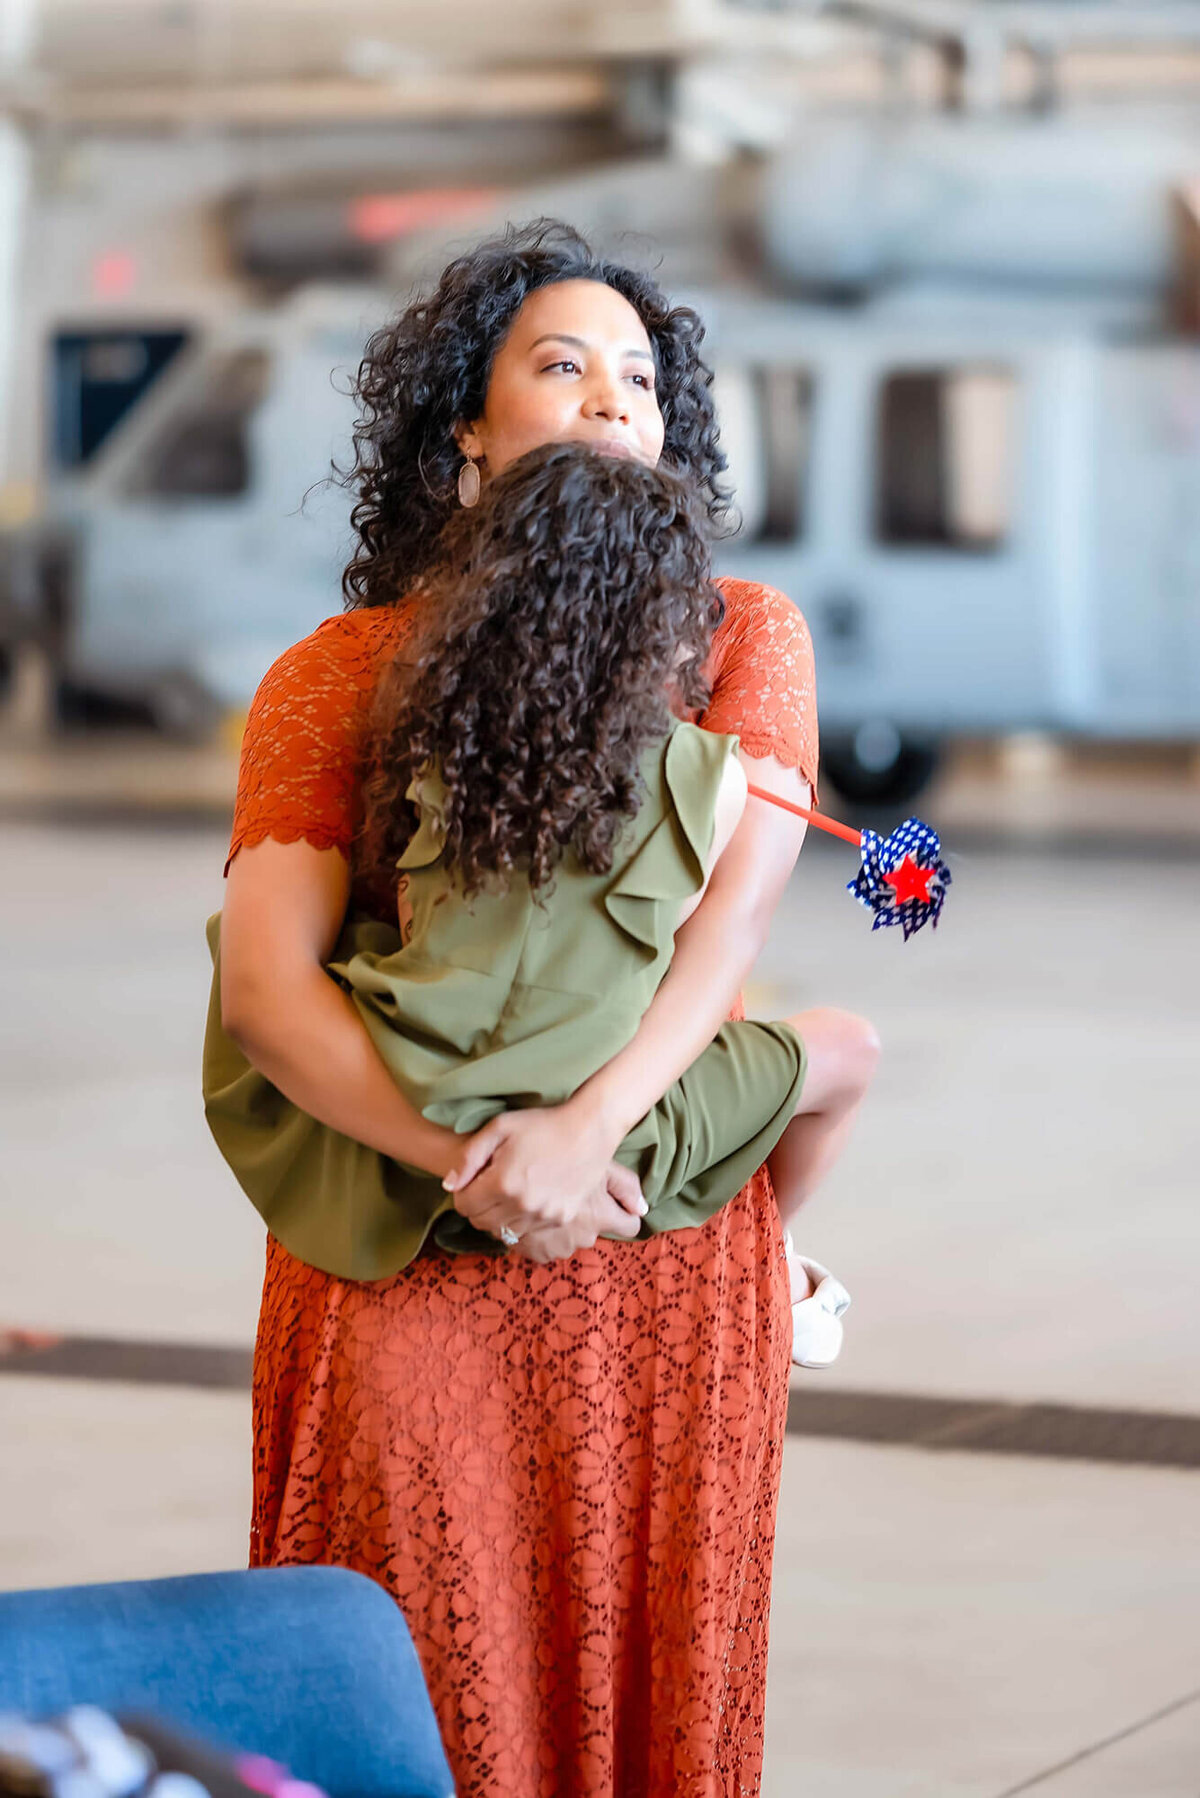 A woman in an orange dress holds her young daughter in her arms and looks out at the flight deck. There is a helicopter in the hangar behind them.